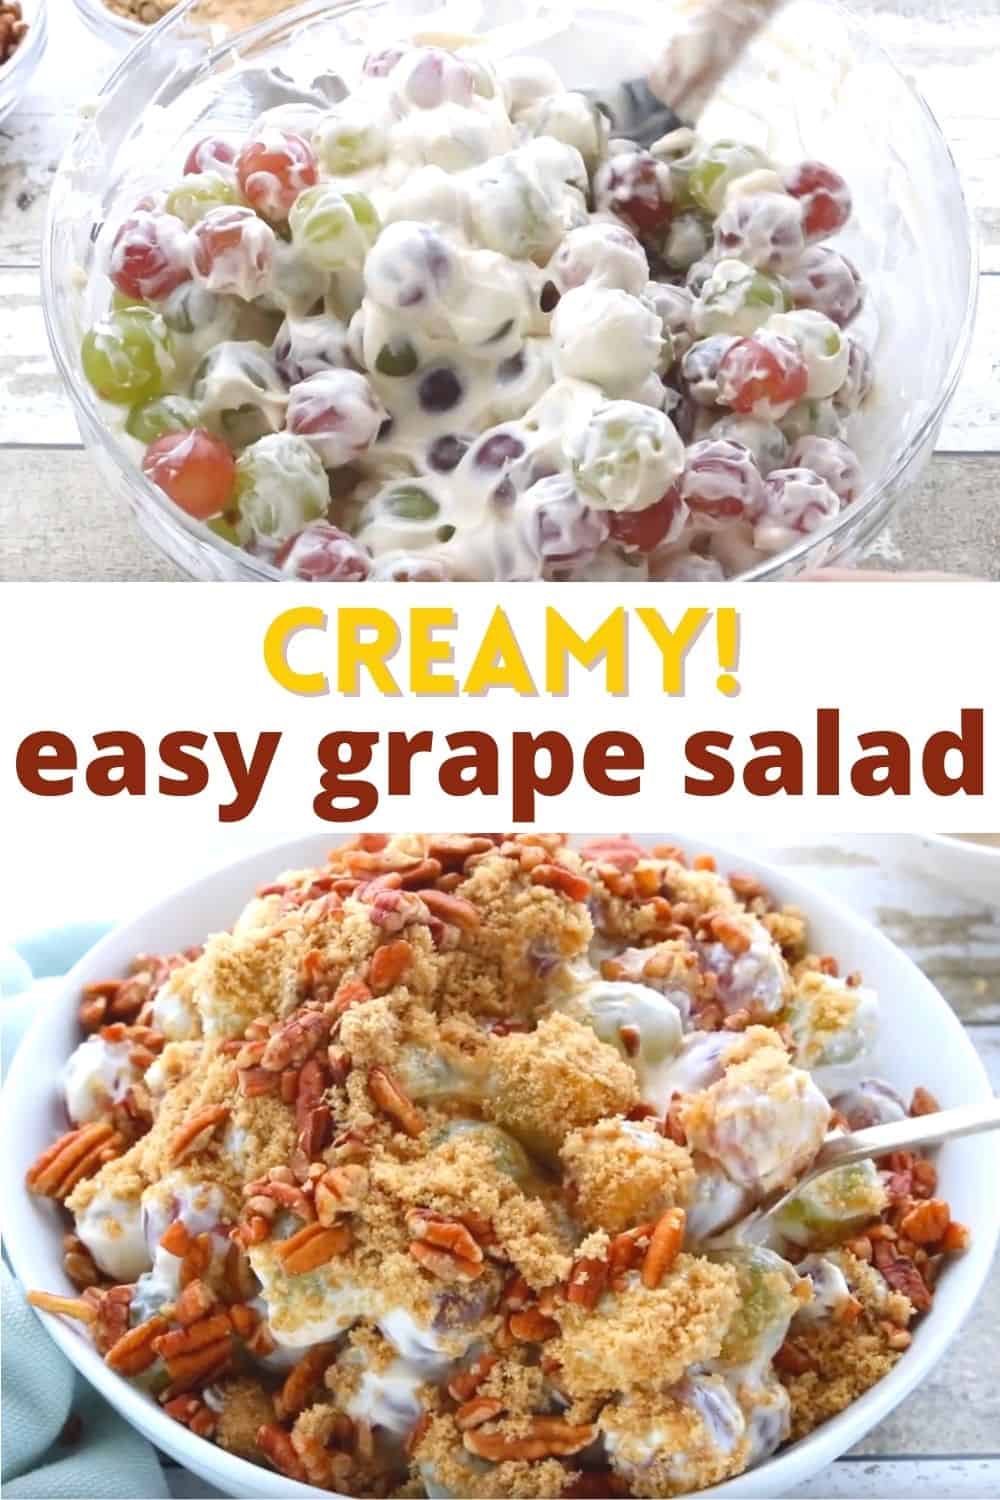 This grape salad is a copycat recipe of Chicken Salad Chick's side dish. This is the BEST creamy grape salad with a crunchy brown sugar pecan topping.